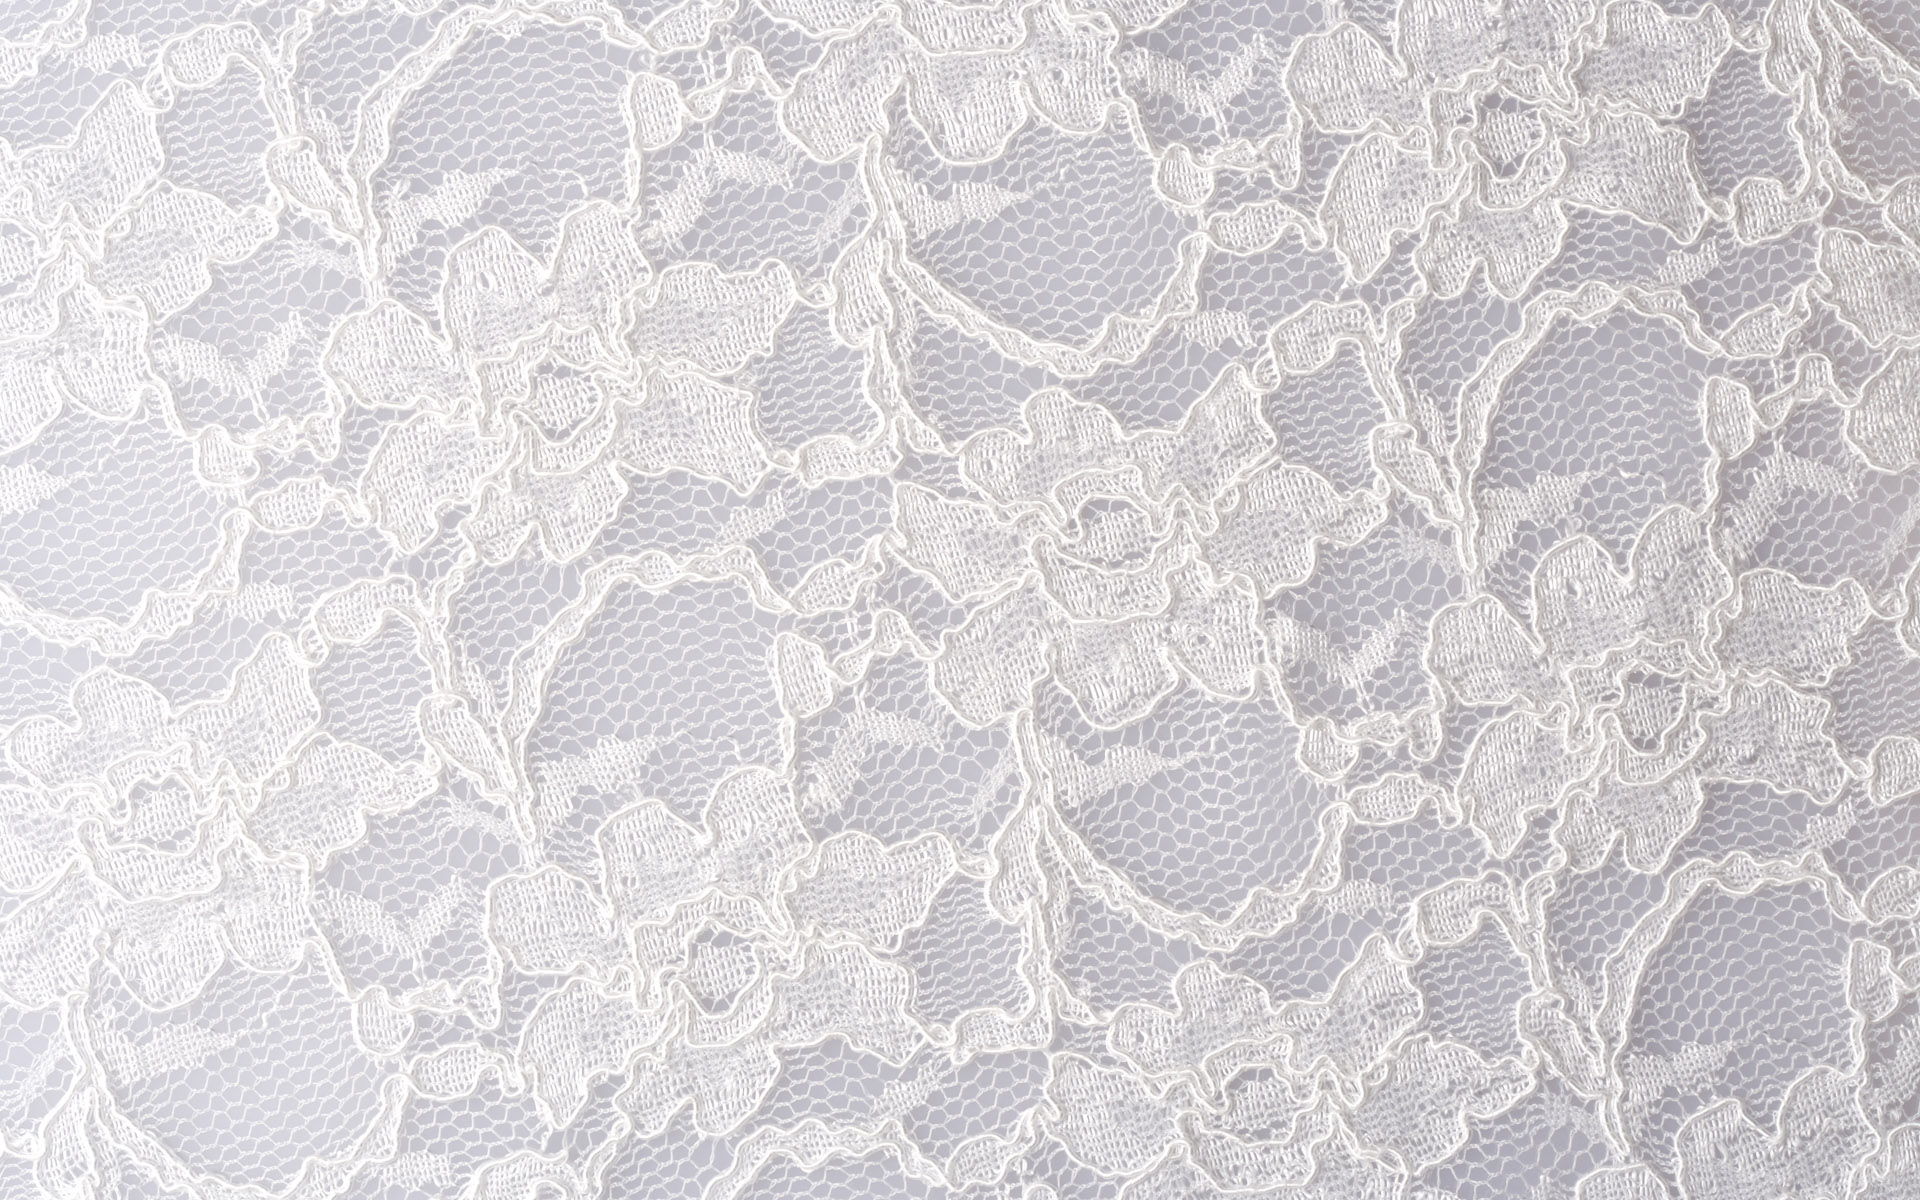 Lace Background Pictures To Pin Pinsdaddy